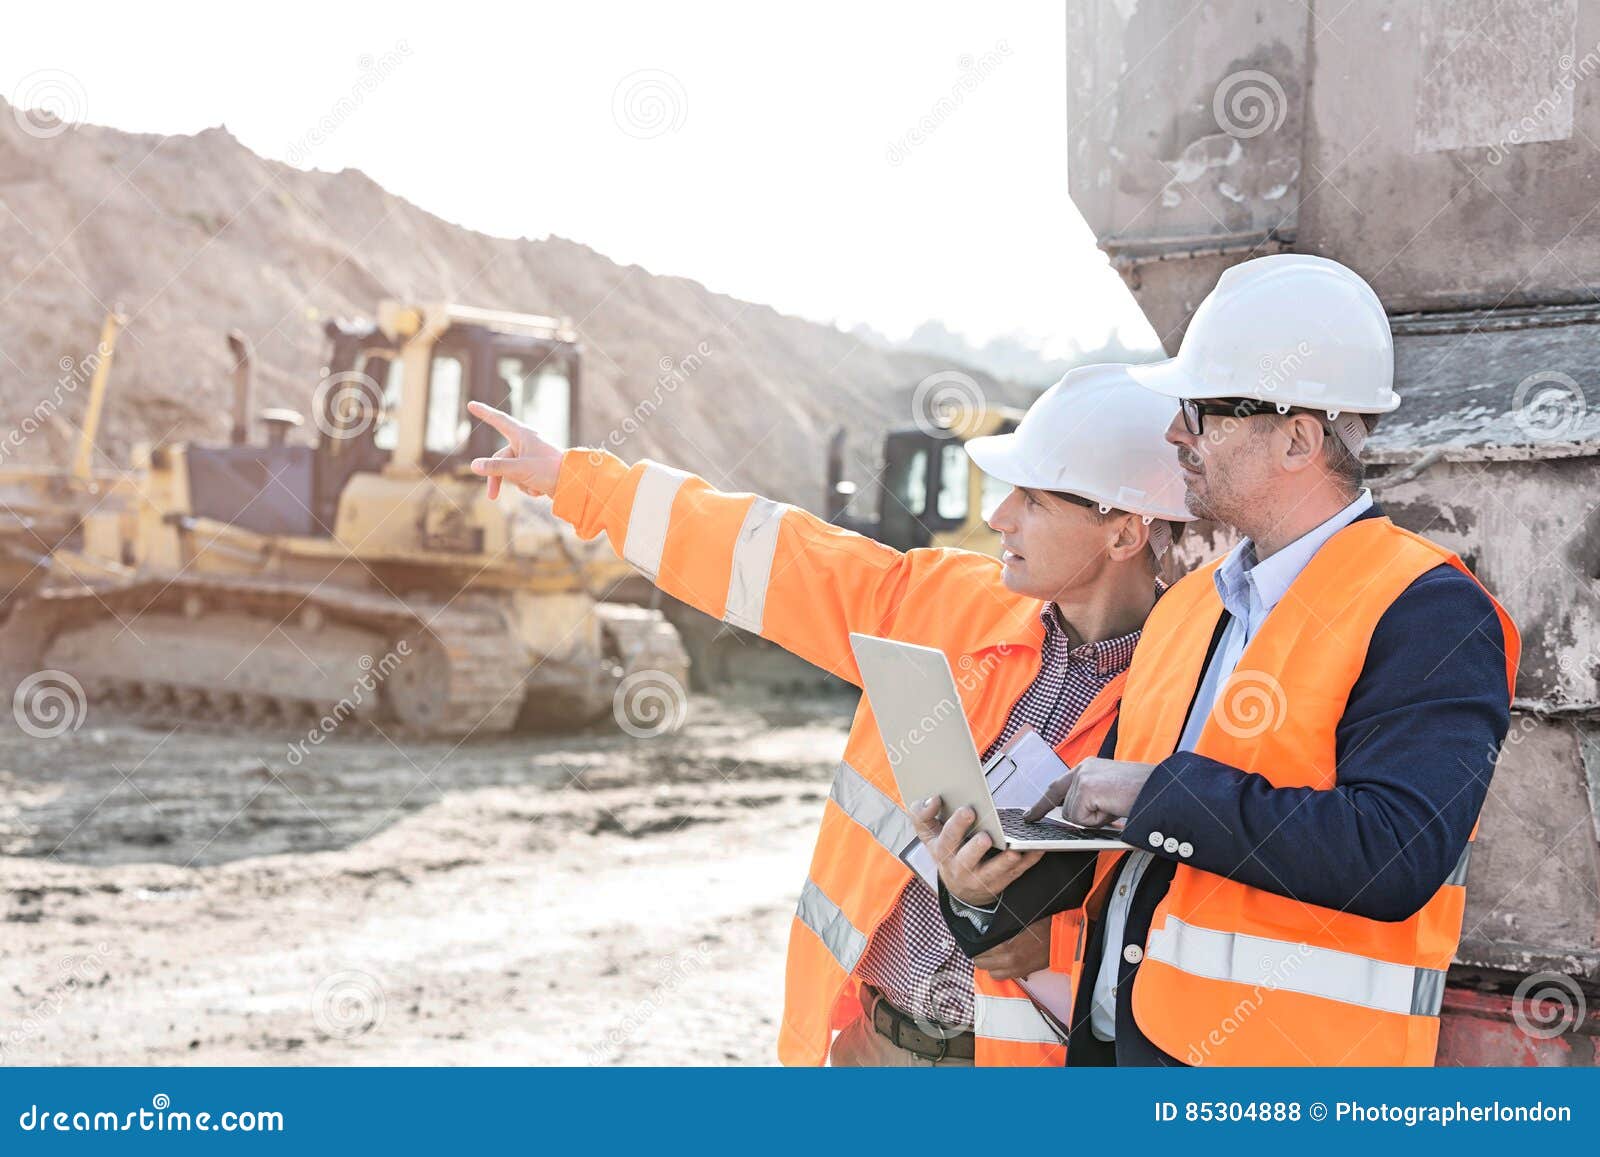 supervisor showing something to coworker holding laptop at construction site